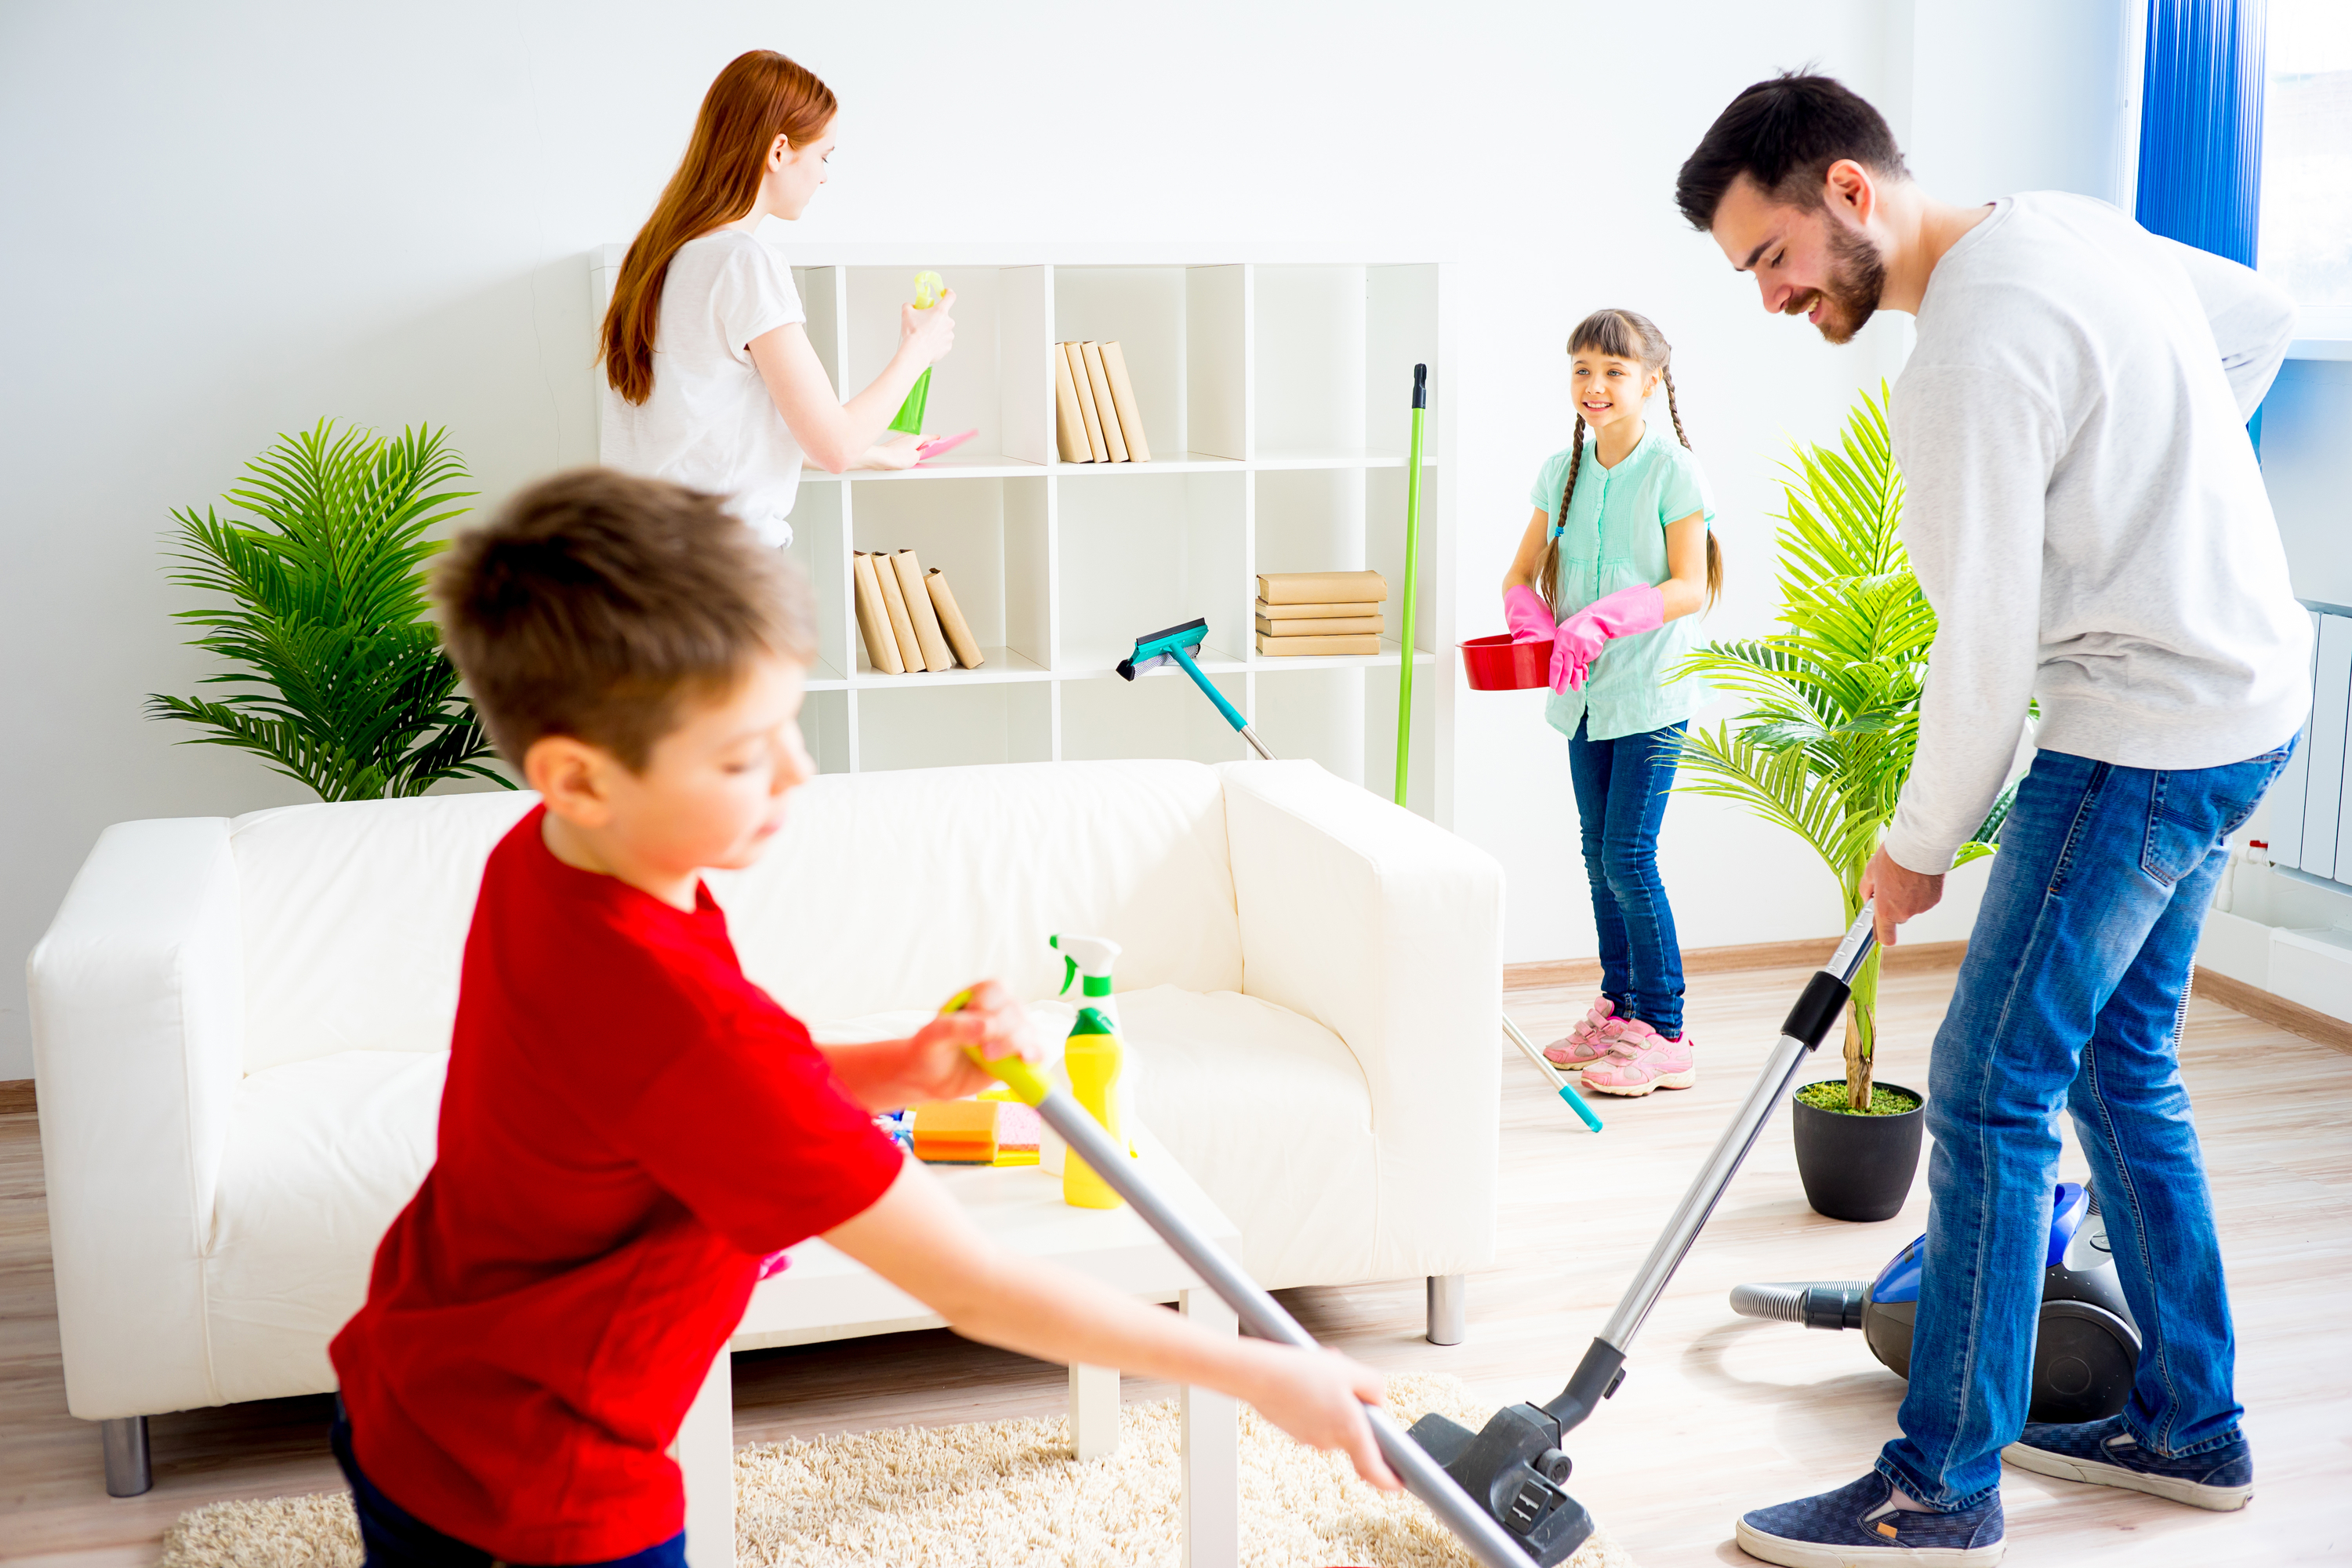 How Can You Find Private House Cleaning Jobs?